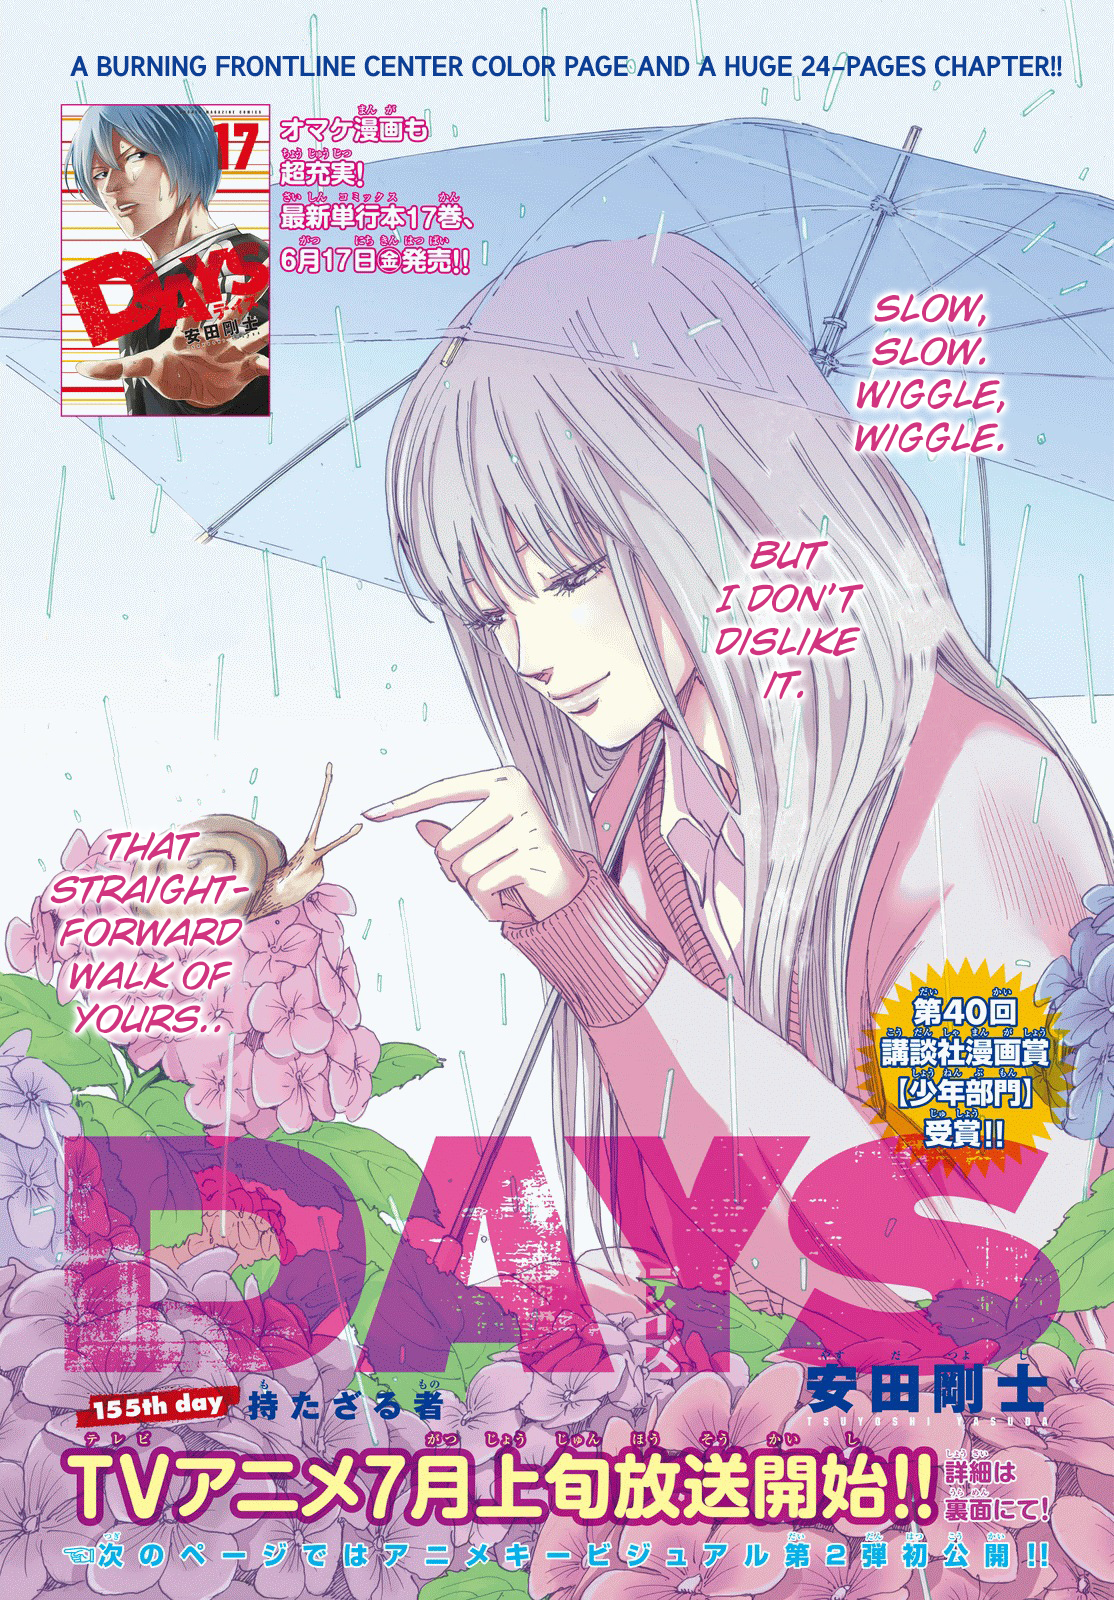 Days Vol. 18 Ch. 155 The Have nots